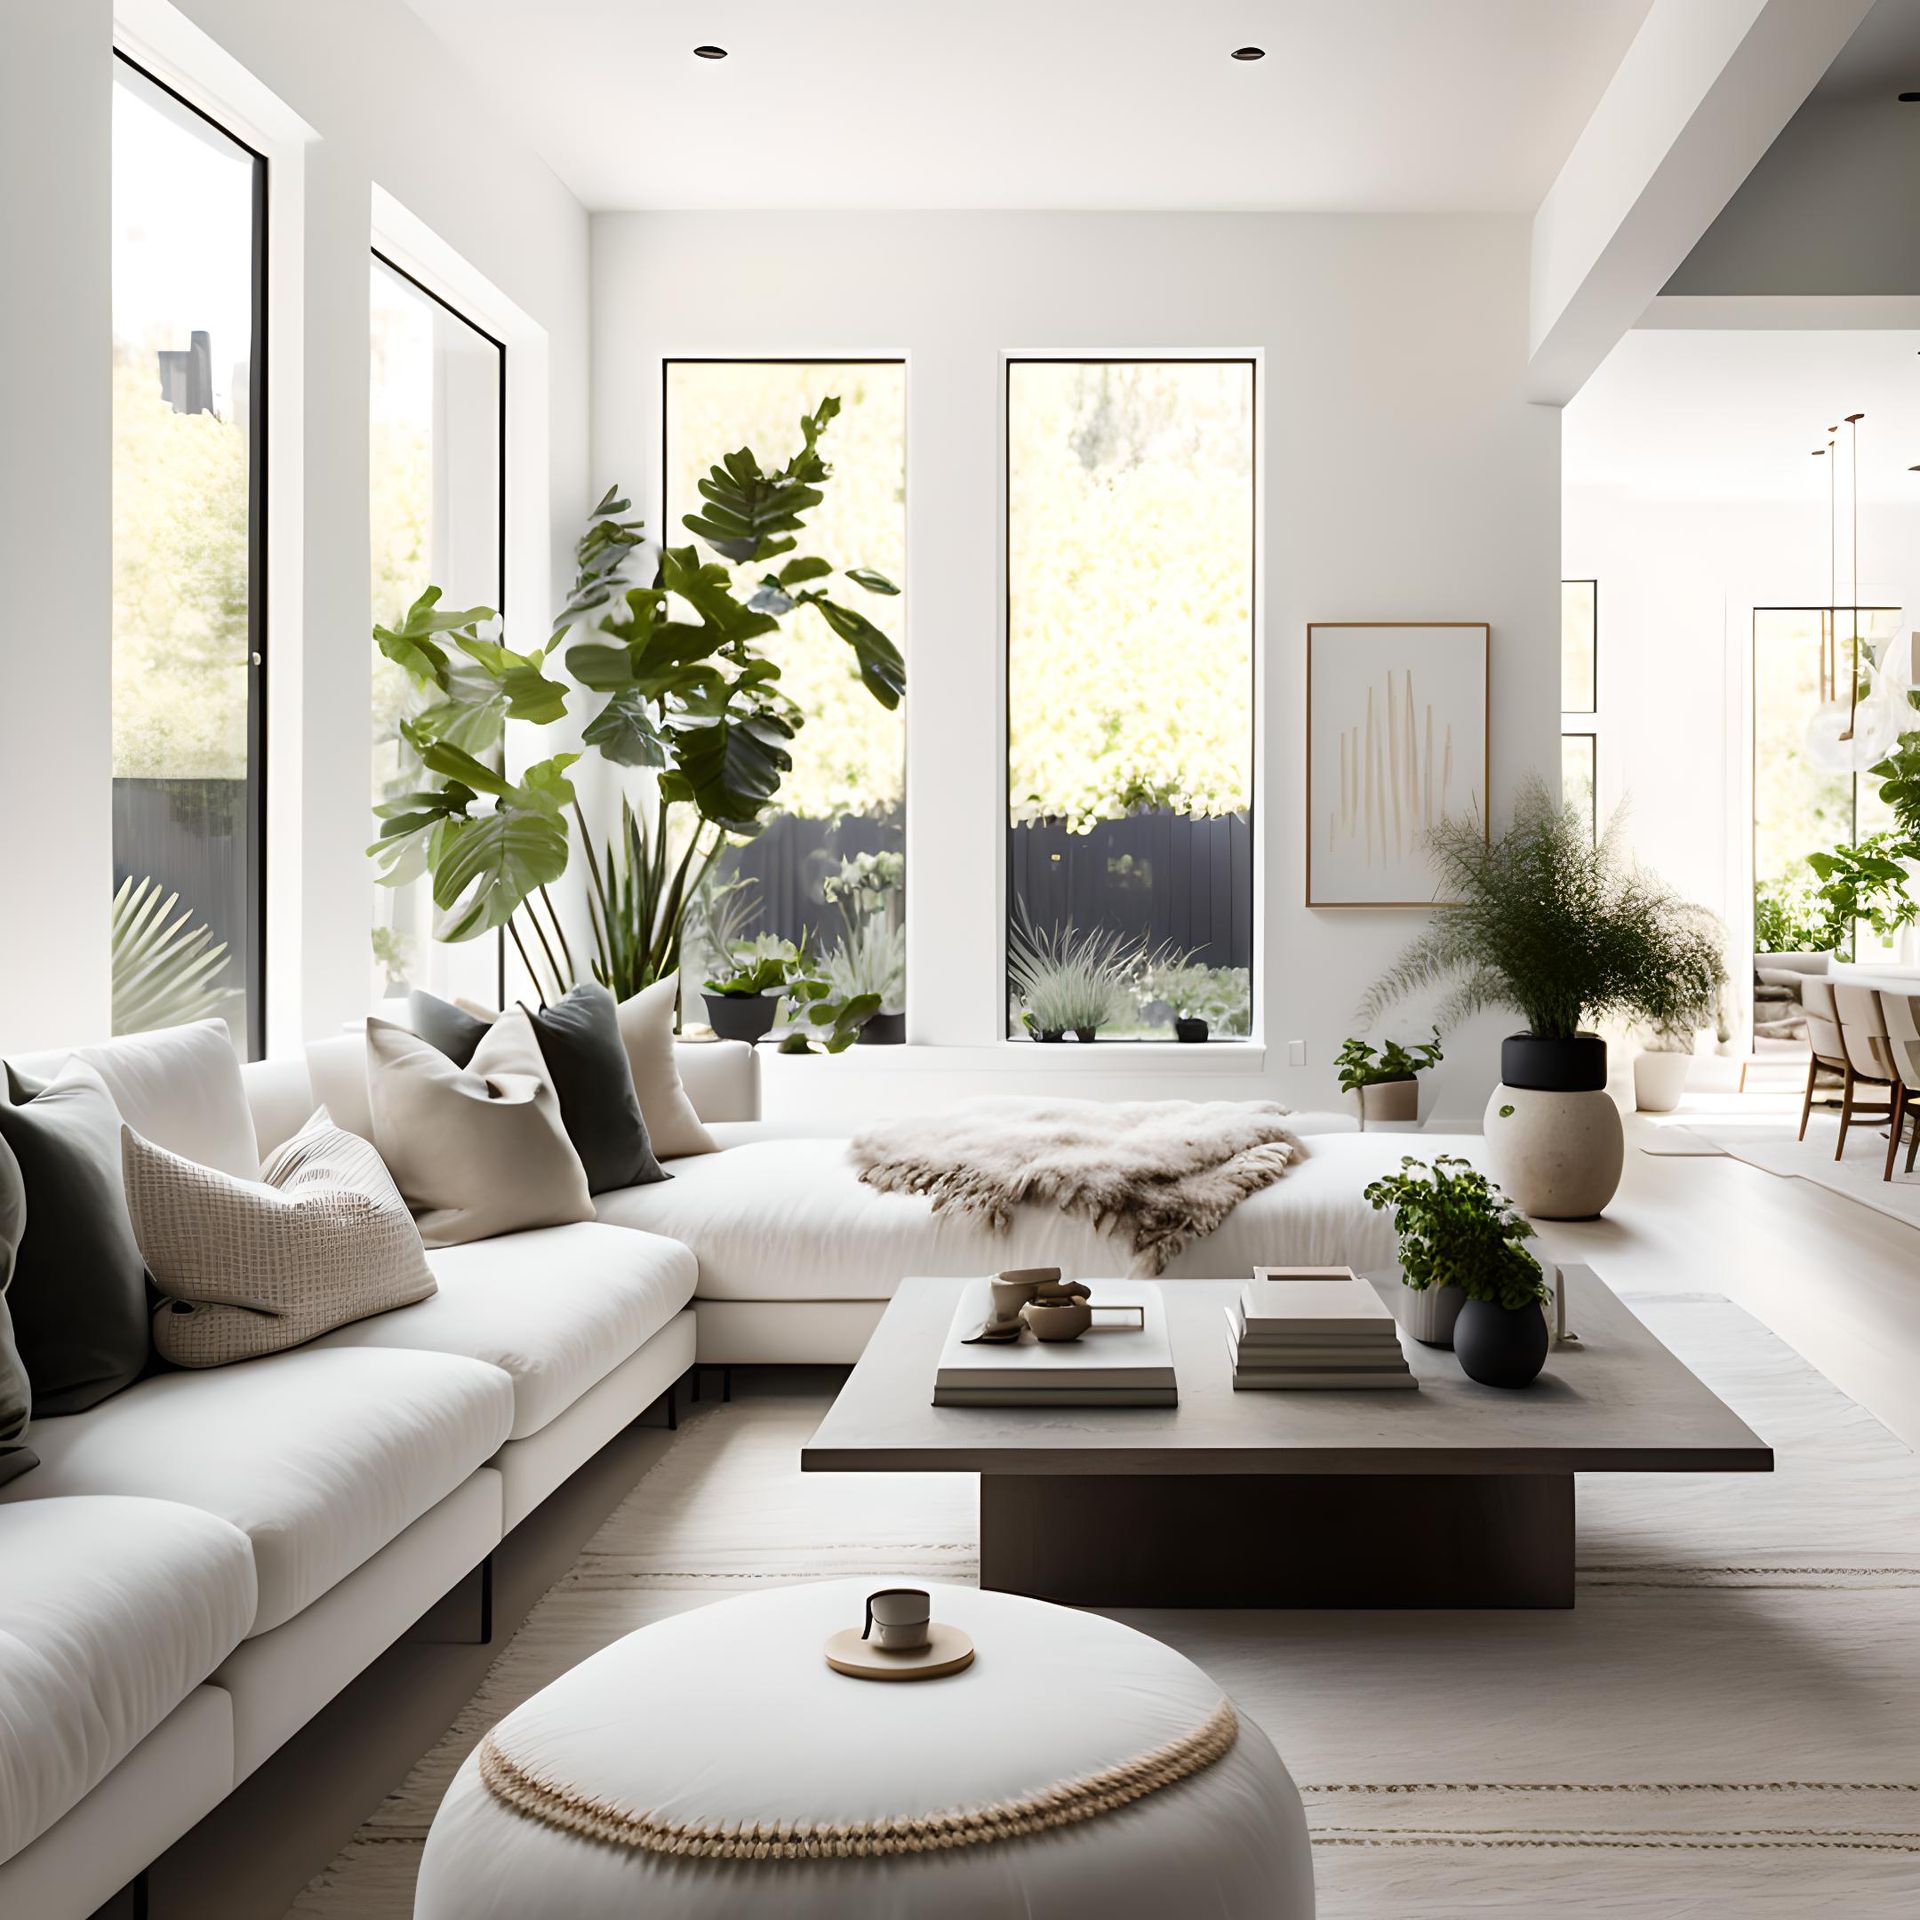 Bright and modern living room with large windows for natural light and minimalistic decor